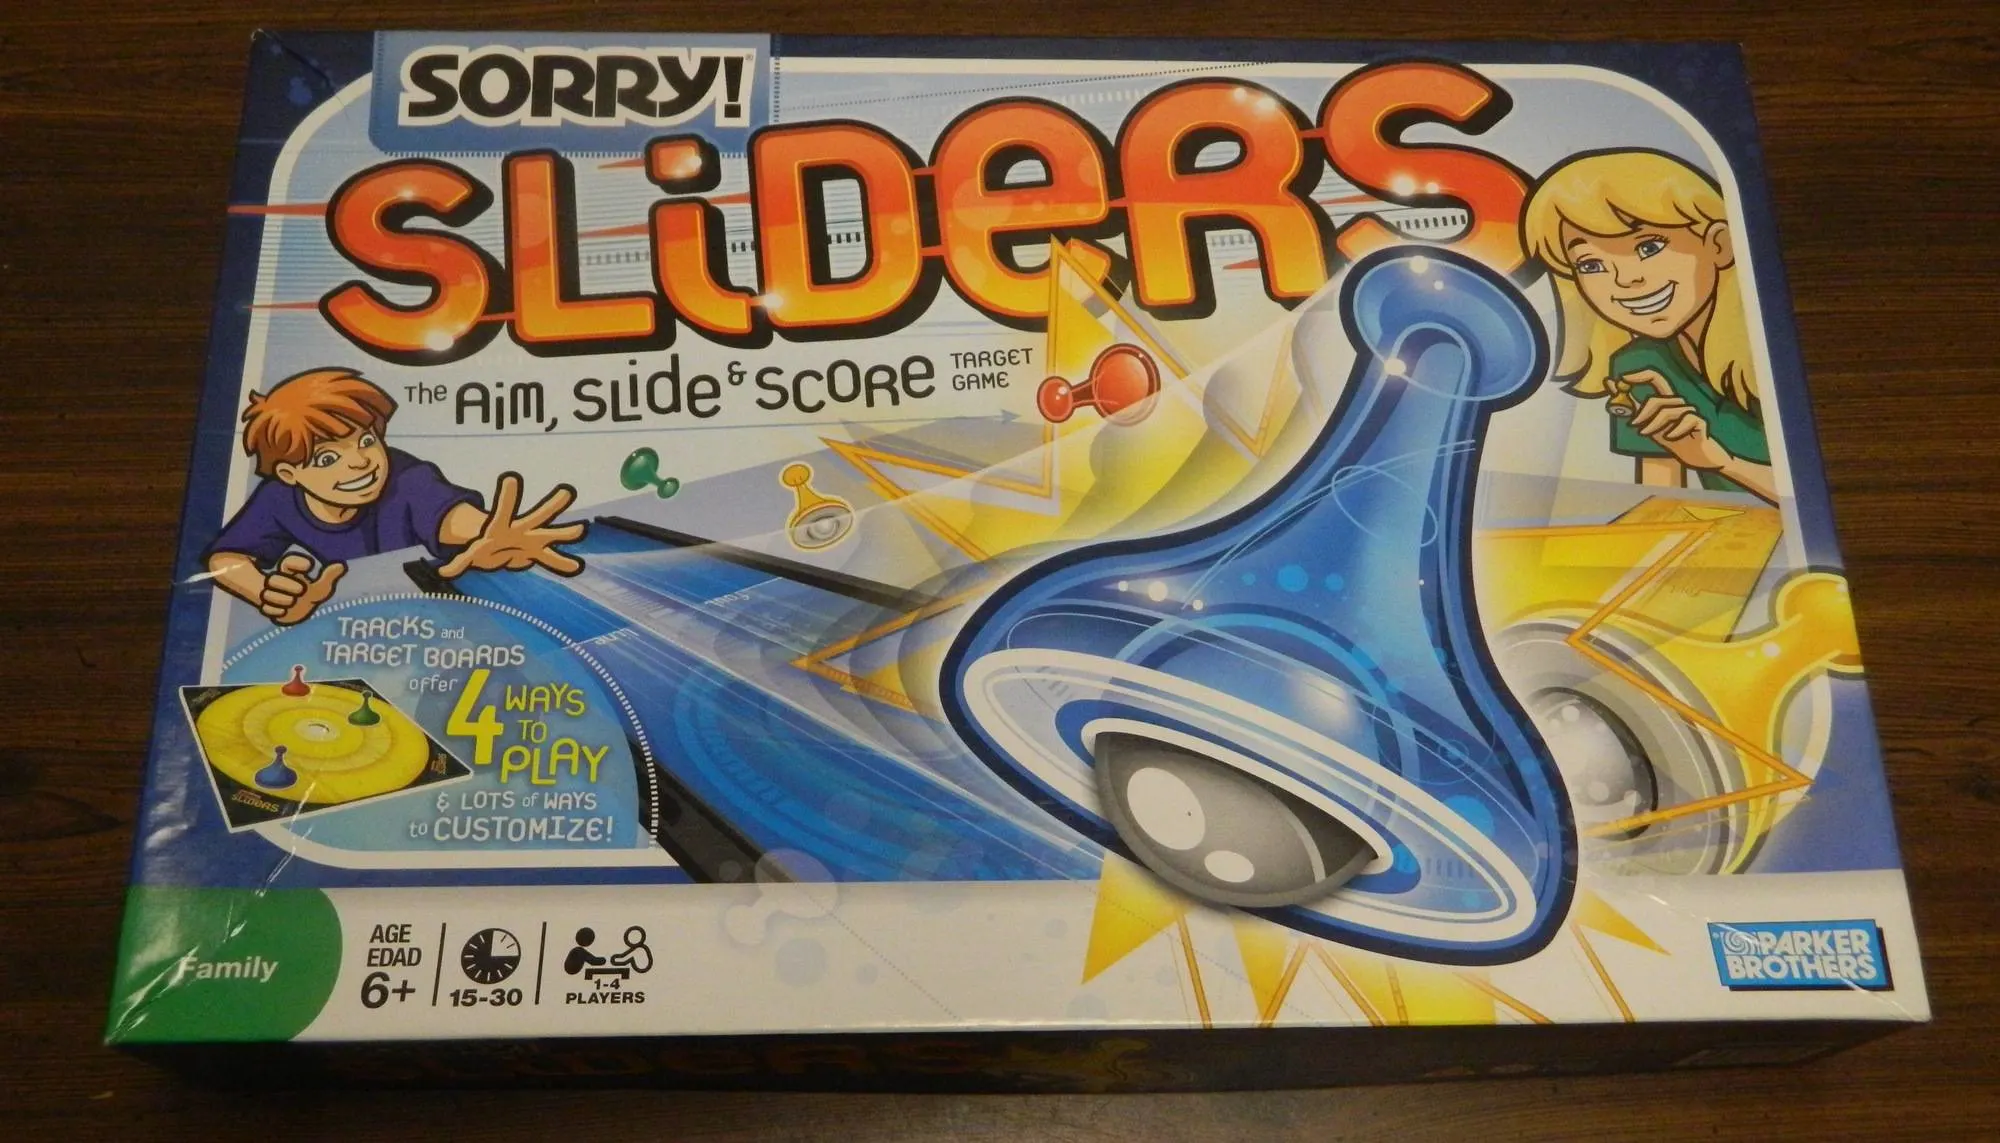 Box for Sorry! Sliders